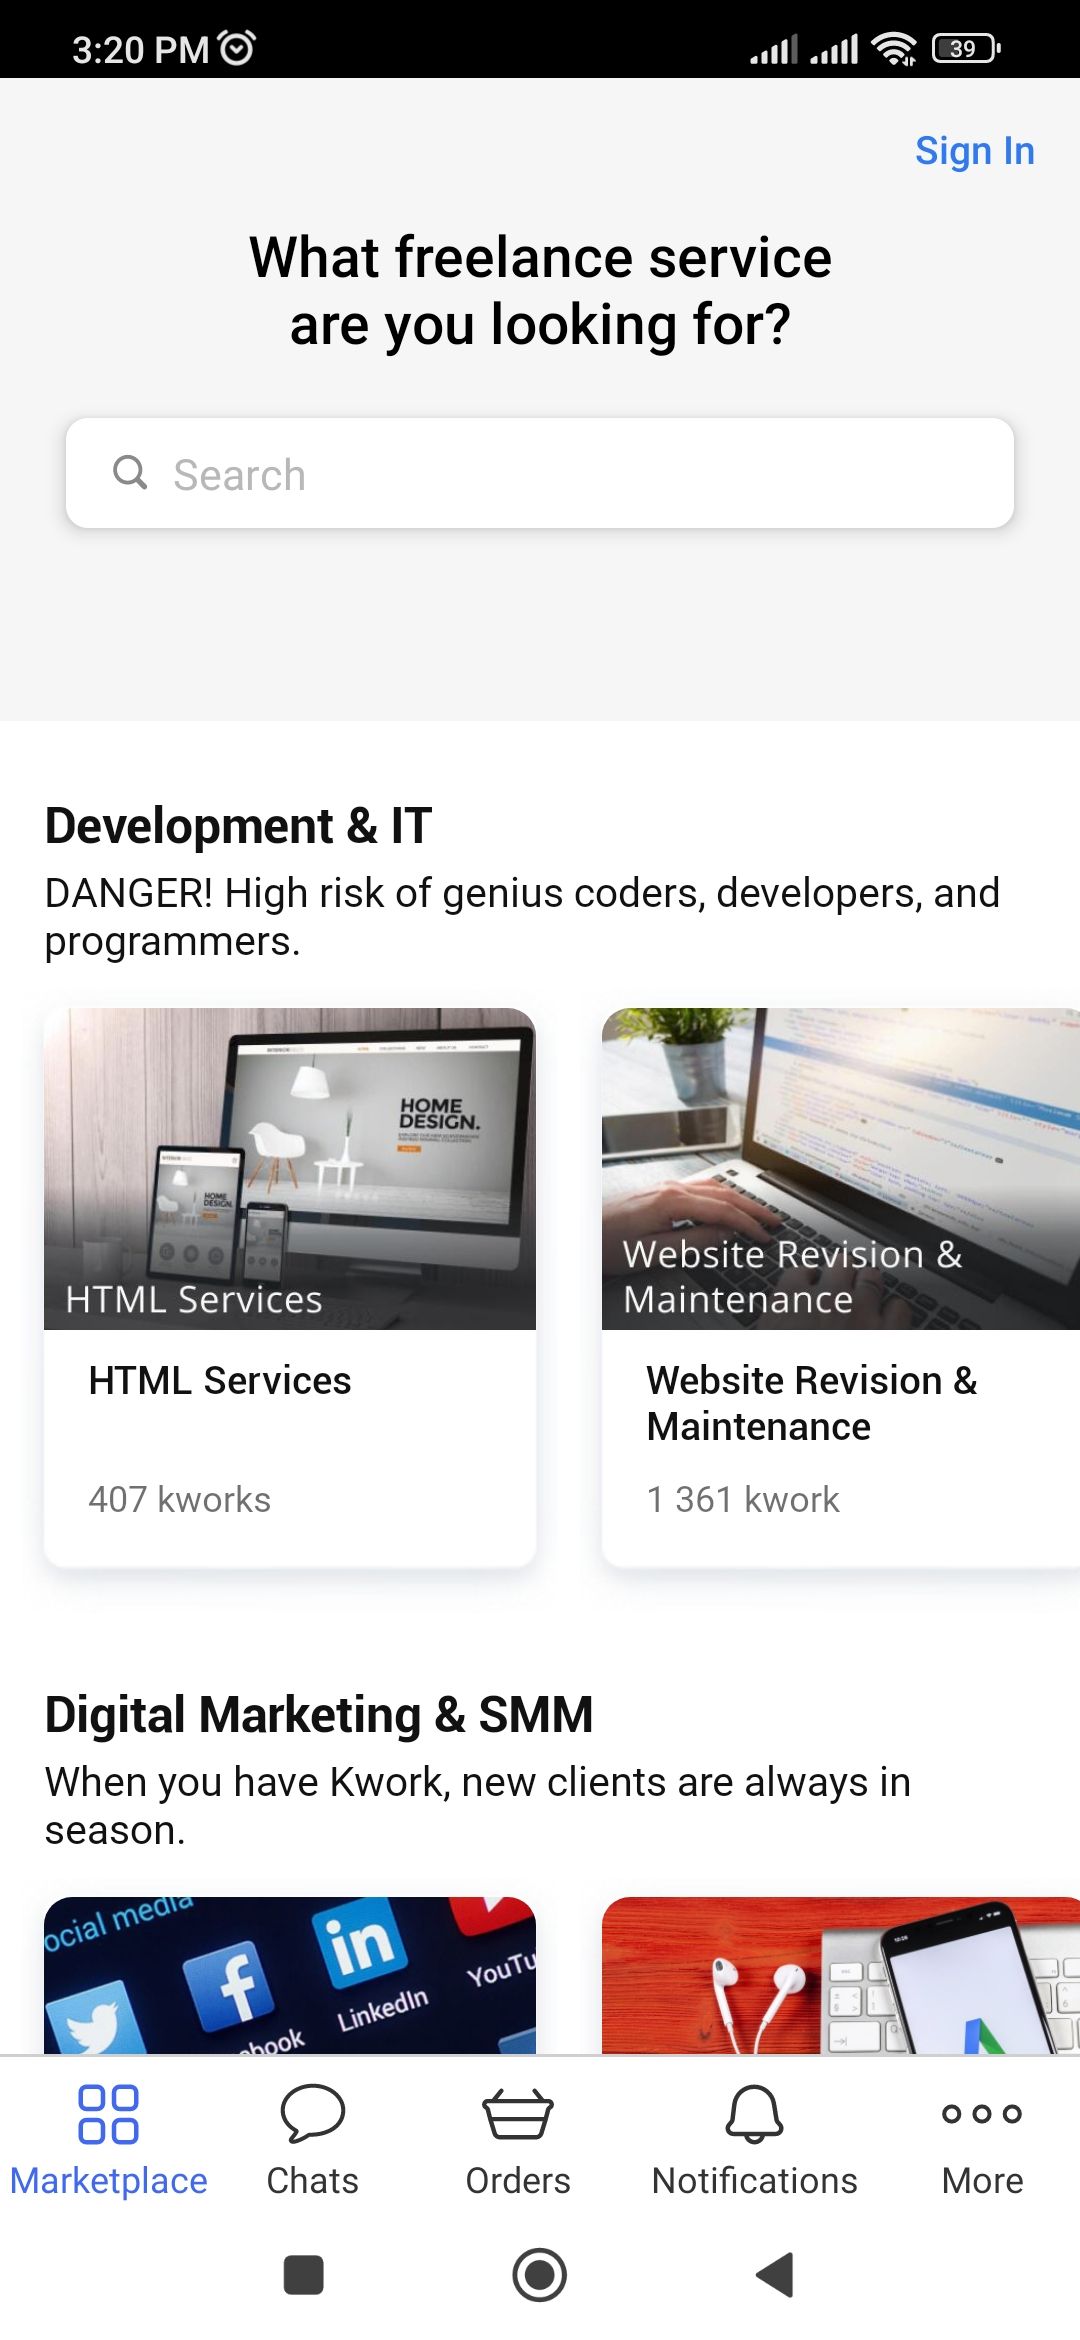 Home page of the Kwork app